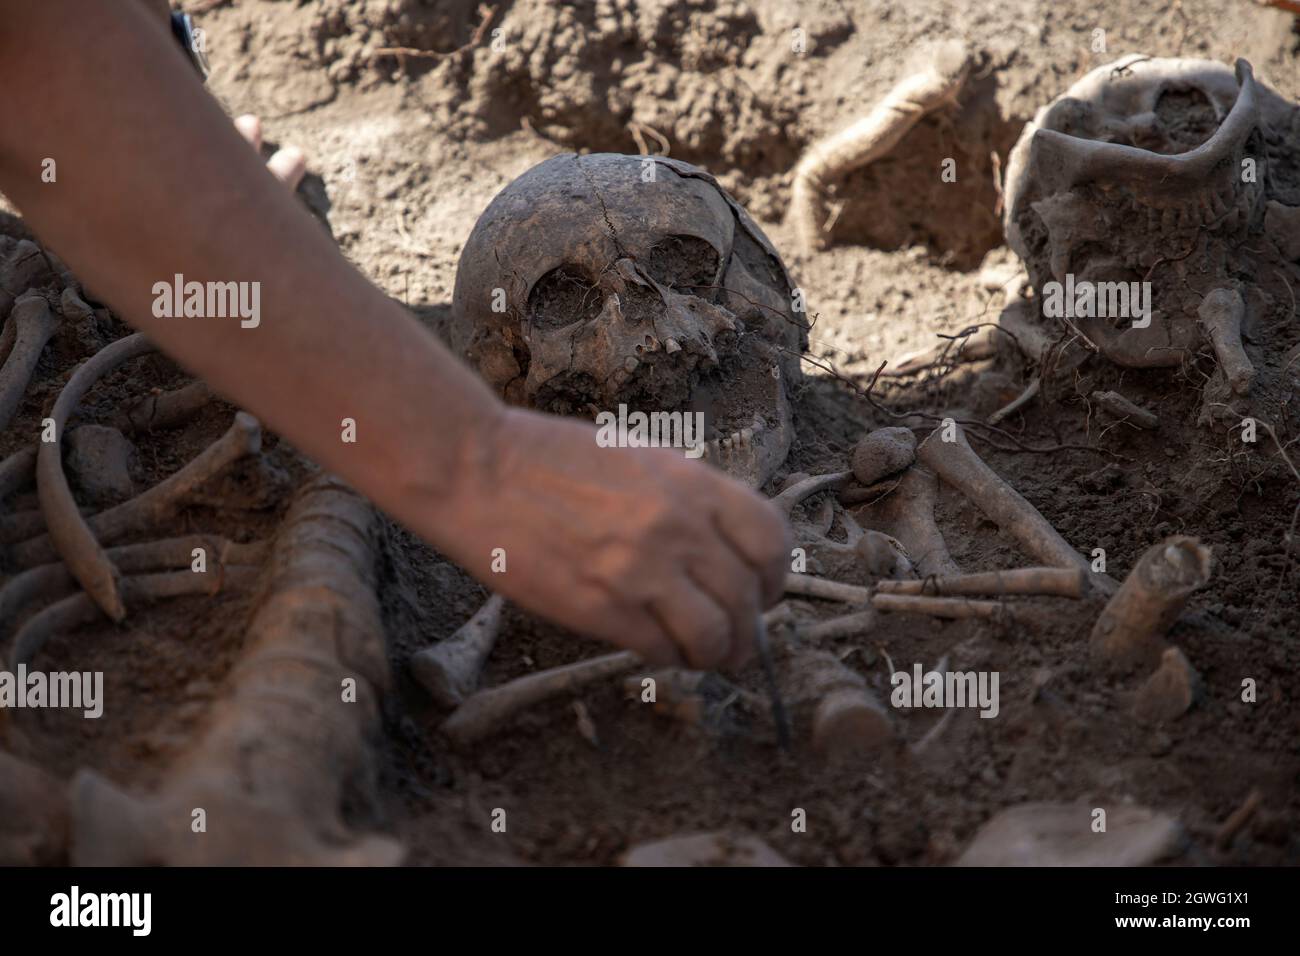 Vinča, Serbia, Sep 4, 2021: Close-up of an archaeologist working on human remains excavation Stock Photo